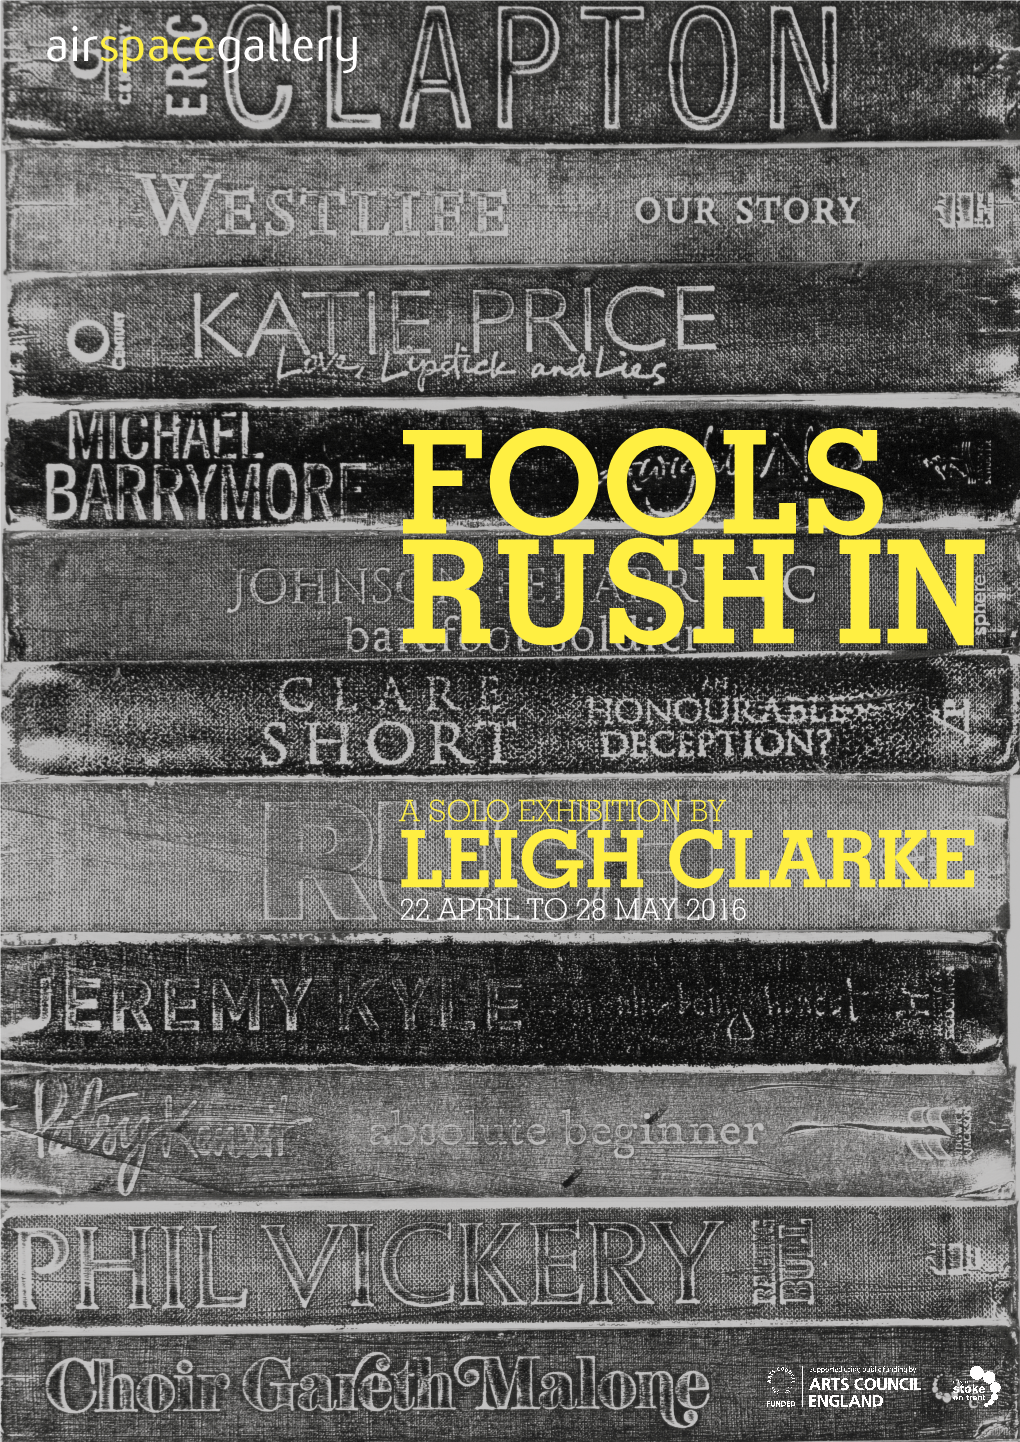 LEIGH CLARKE 22 APRIL to 28 MAY 2016 FOOLS RUSH in Airspacegallery 22 April to 28 May 2016 Public Preview: 22 April 6.00 to 9.00Pm